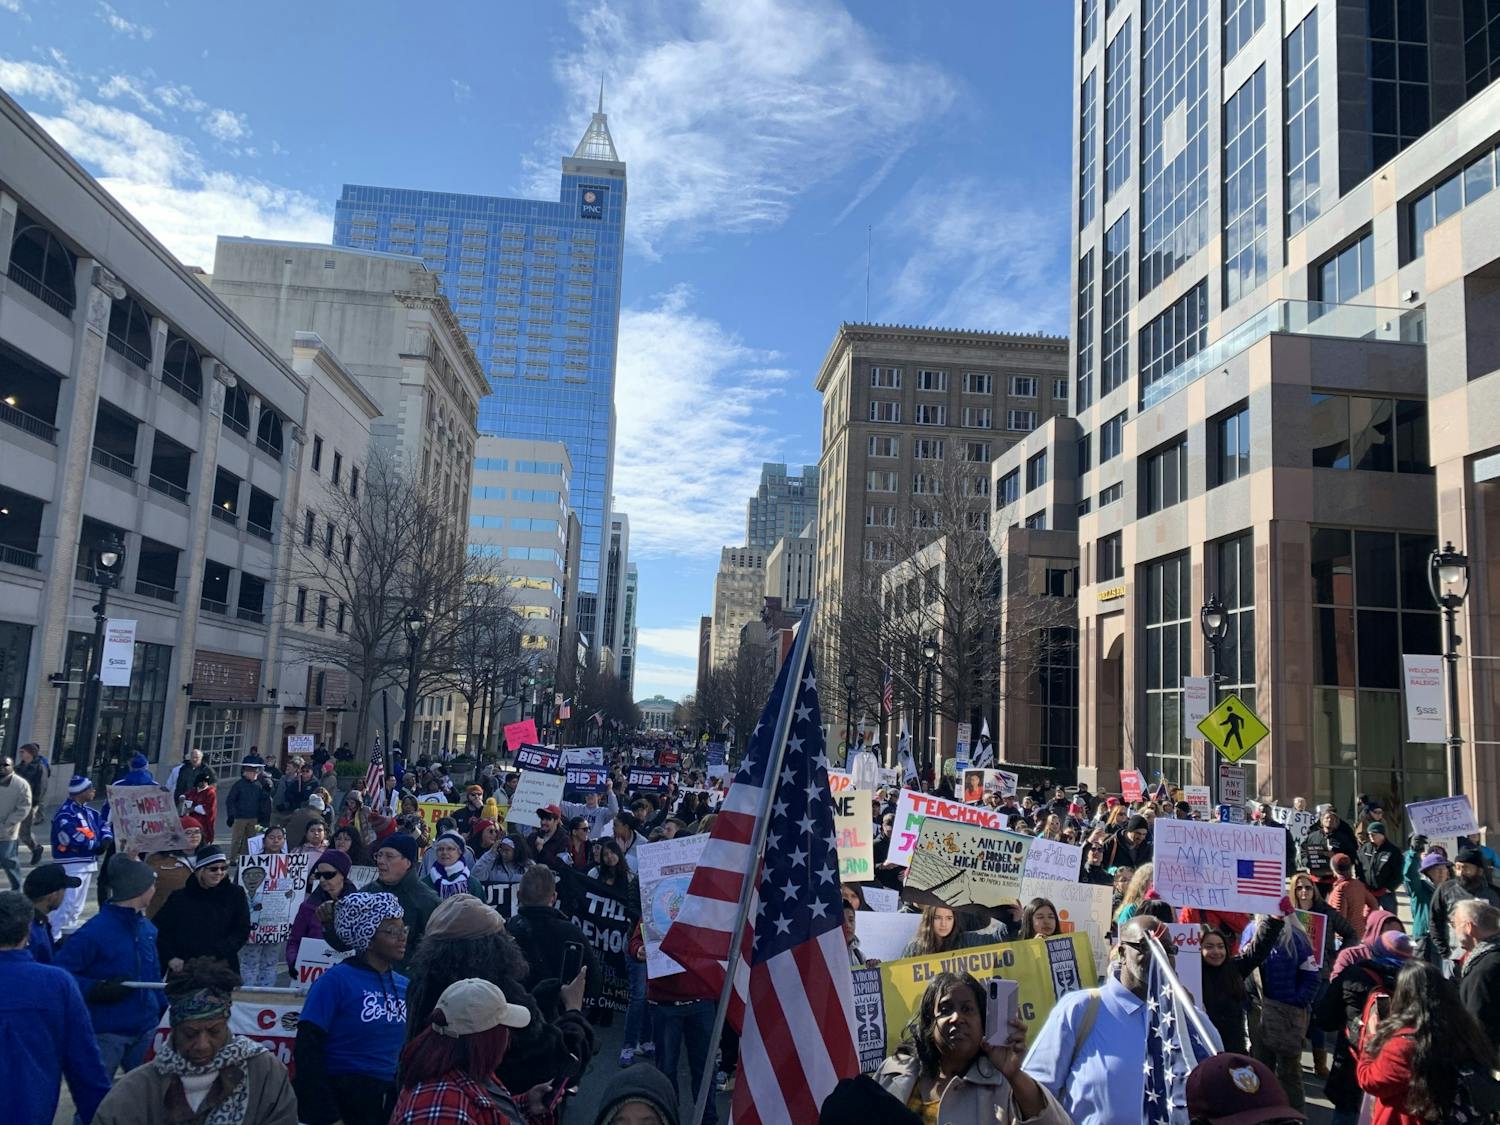 The crowd at the 2020 HKonJ march stretched from West Morgan Street to East Hargett Street.